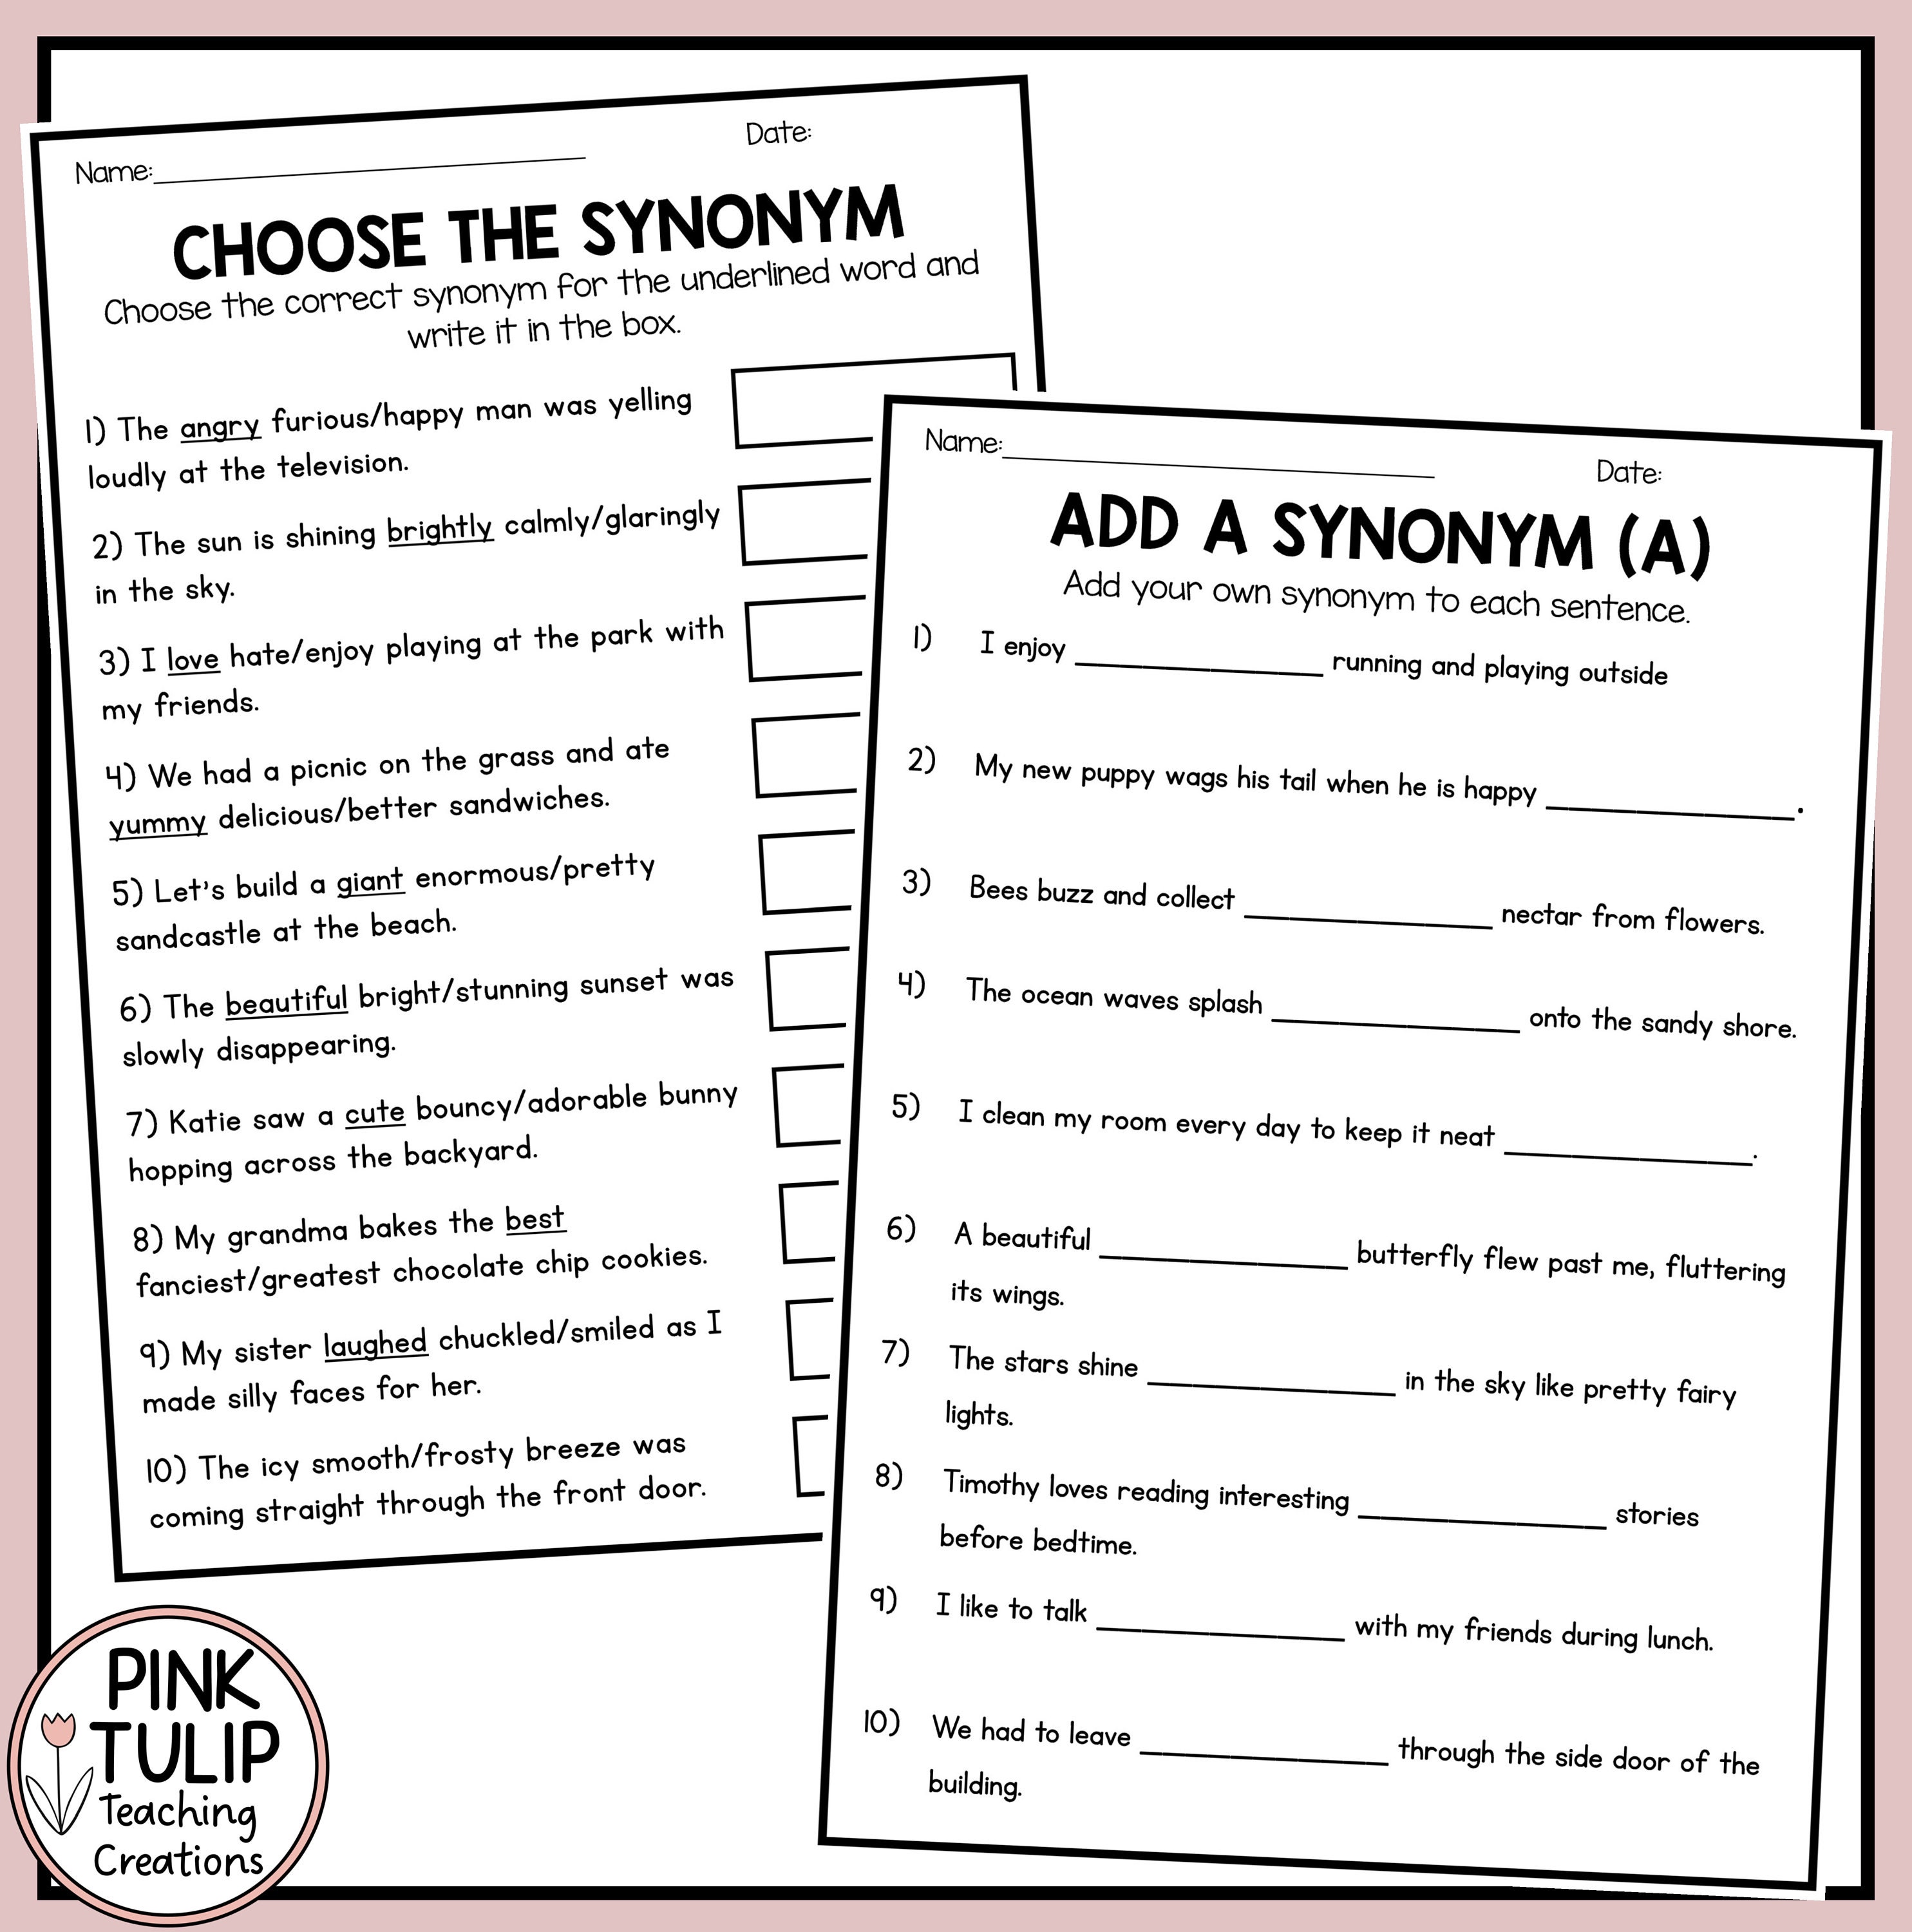 Synonym Worksheet - error, picked, grinned, tune, saved, late and adore